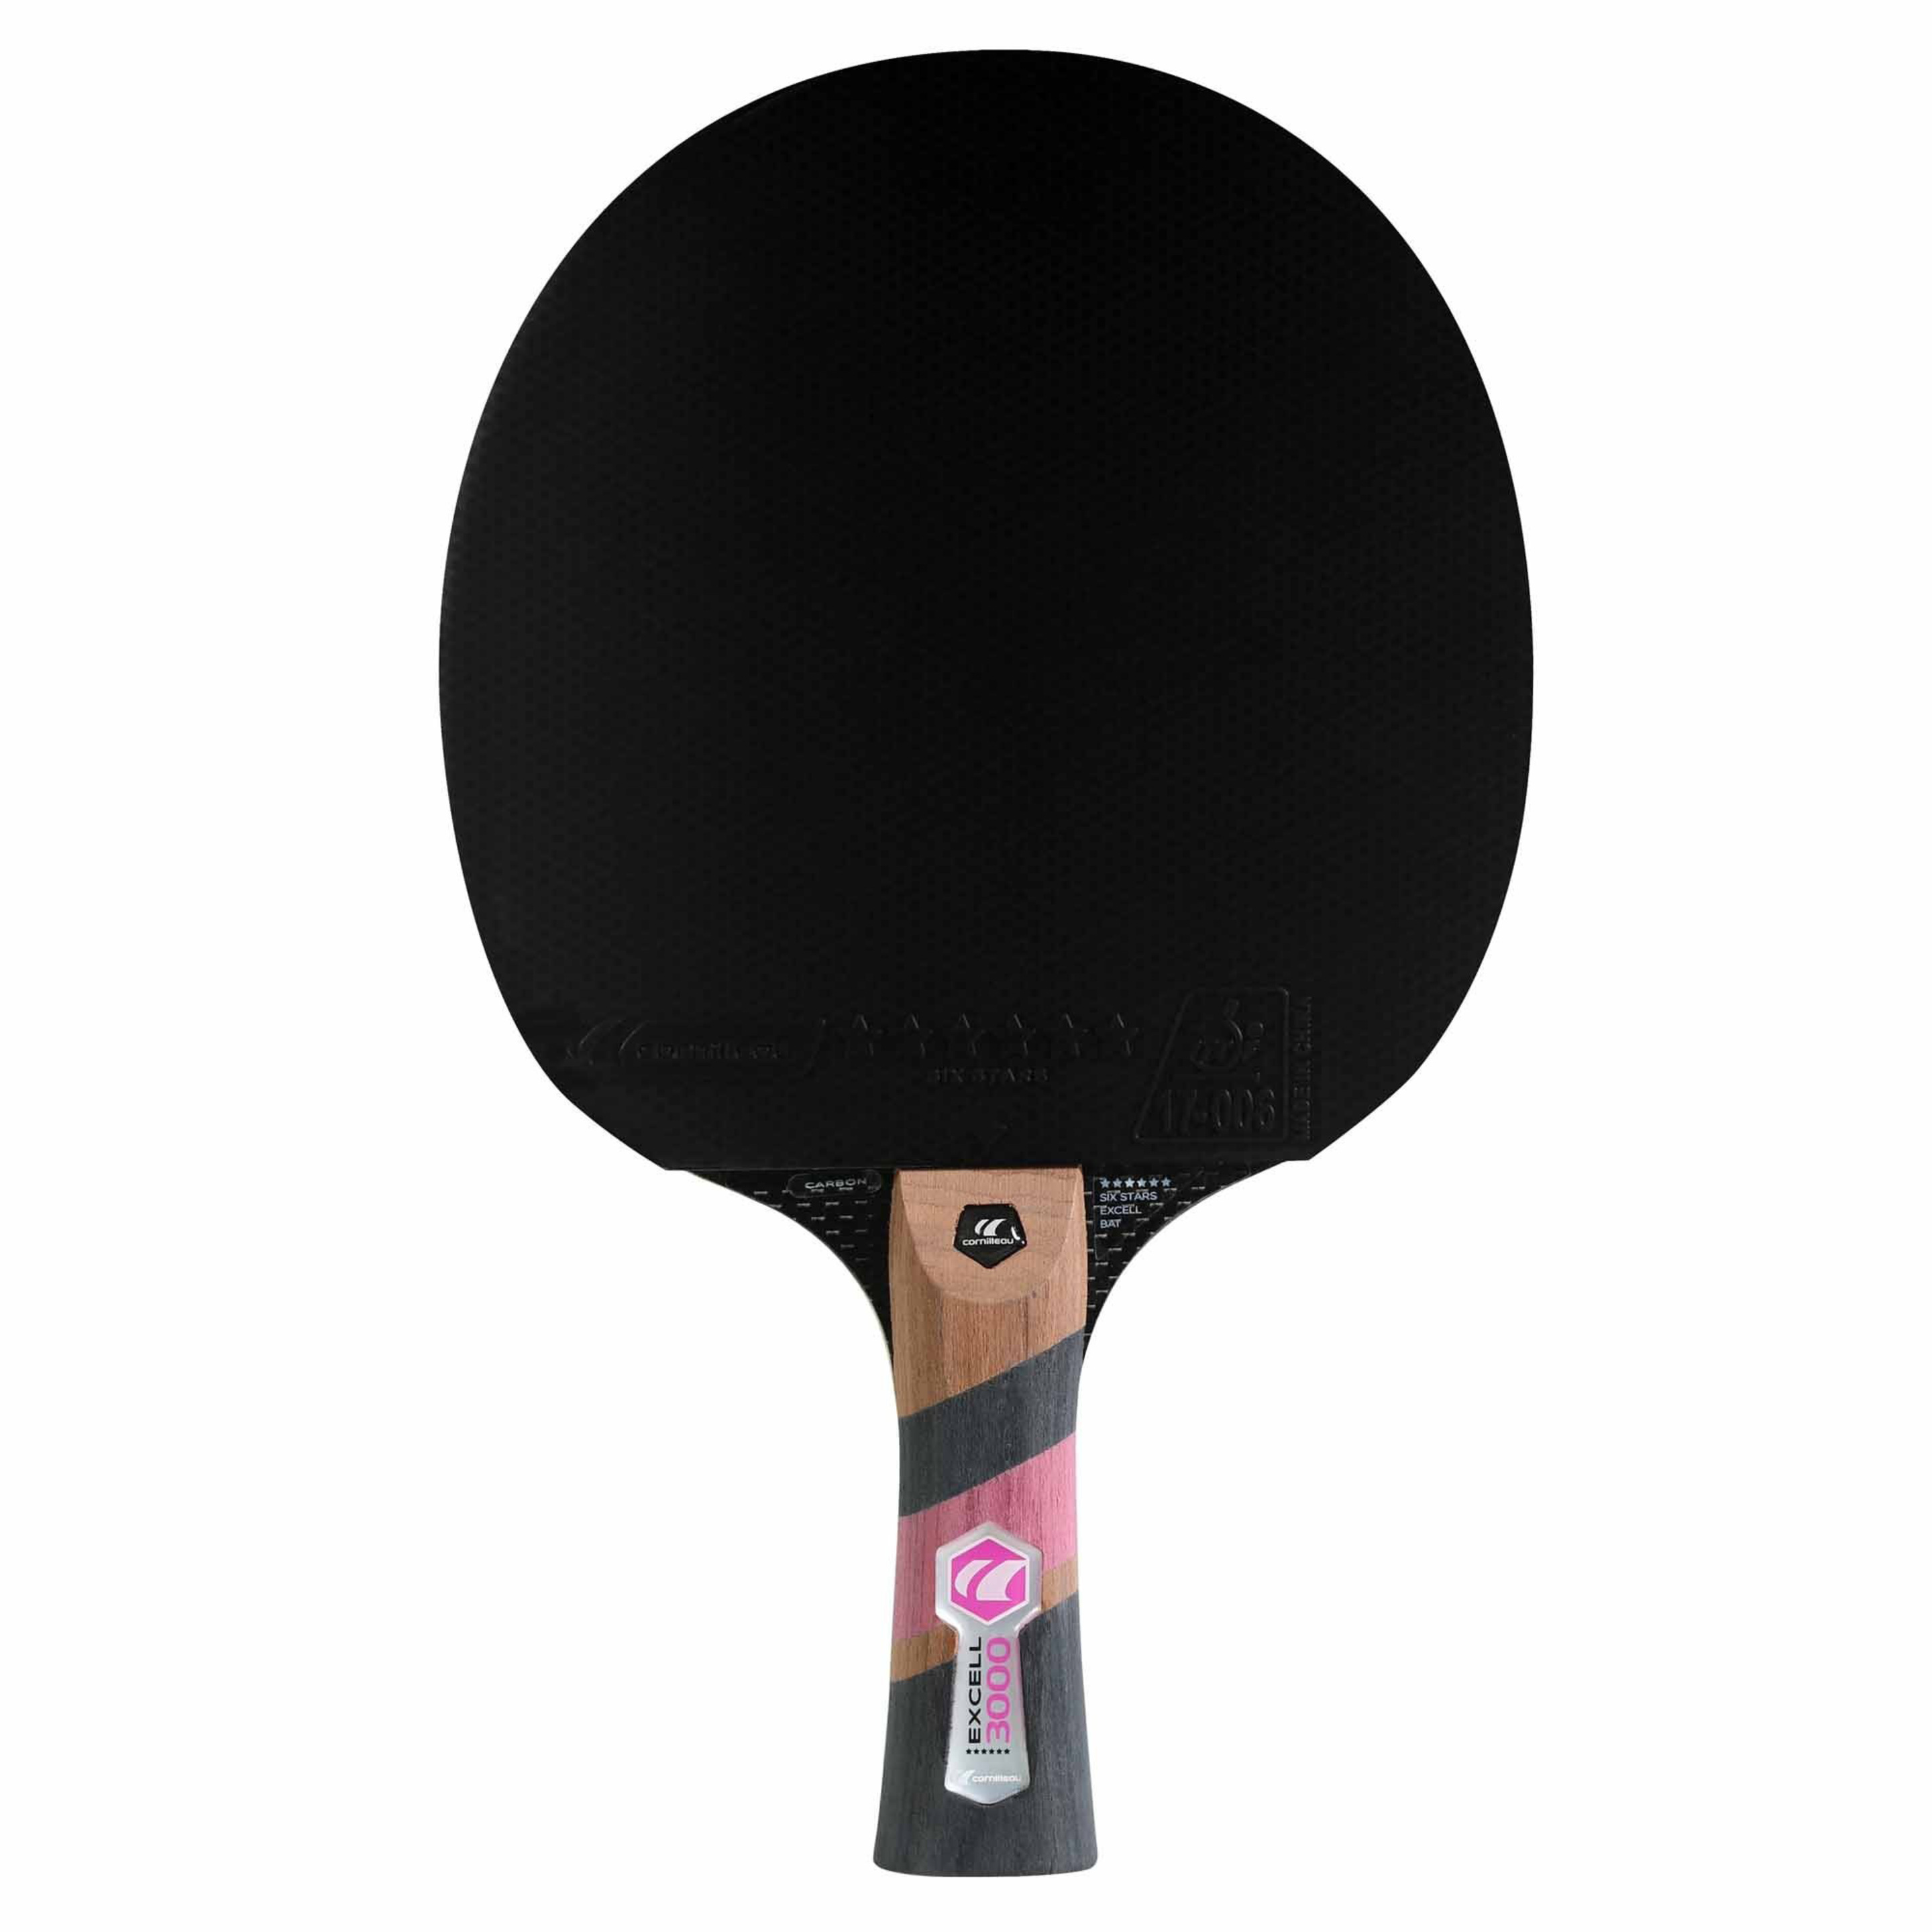 Pala Ping Pong Cornilleau Sport 3000 Excell Carbon 413000 - negro - 